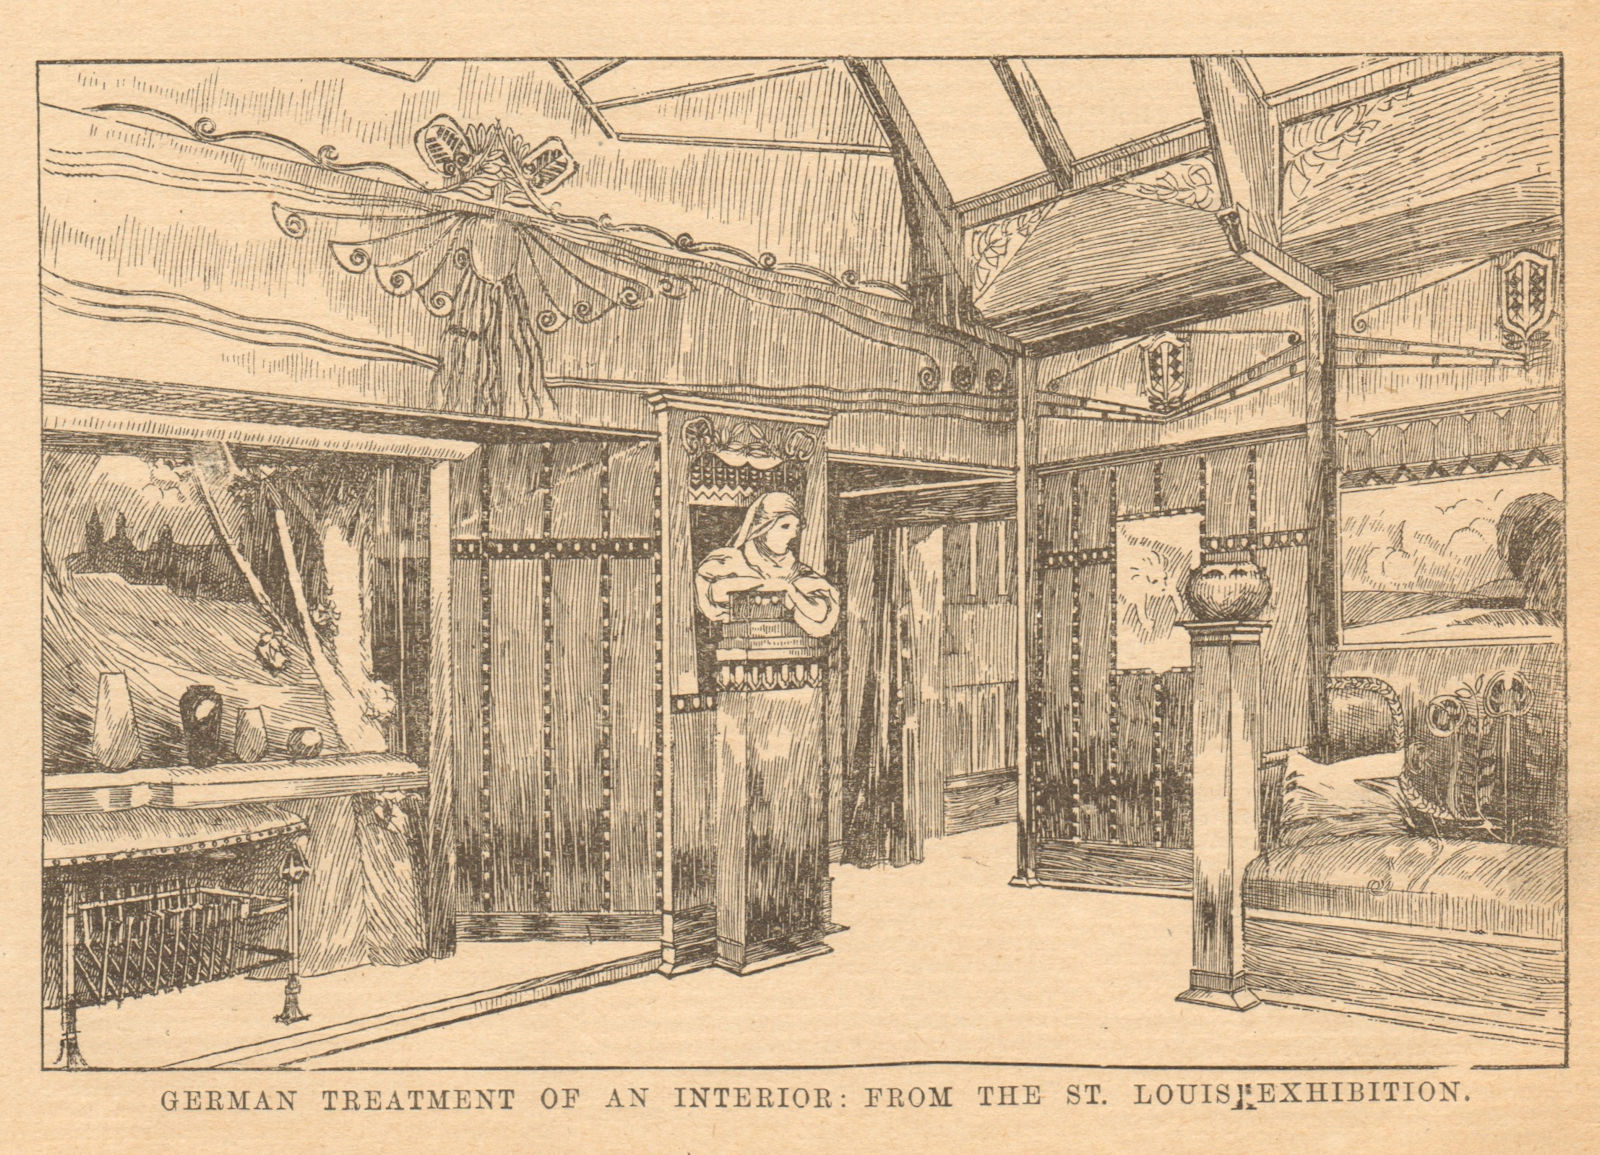 Associate Product German treatment of an interior, from the St. Louis Exhibition. Germany 1905